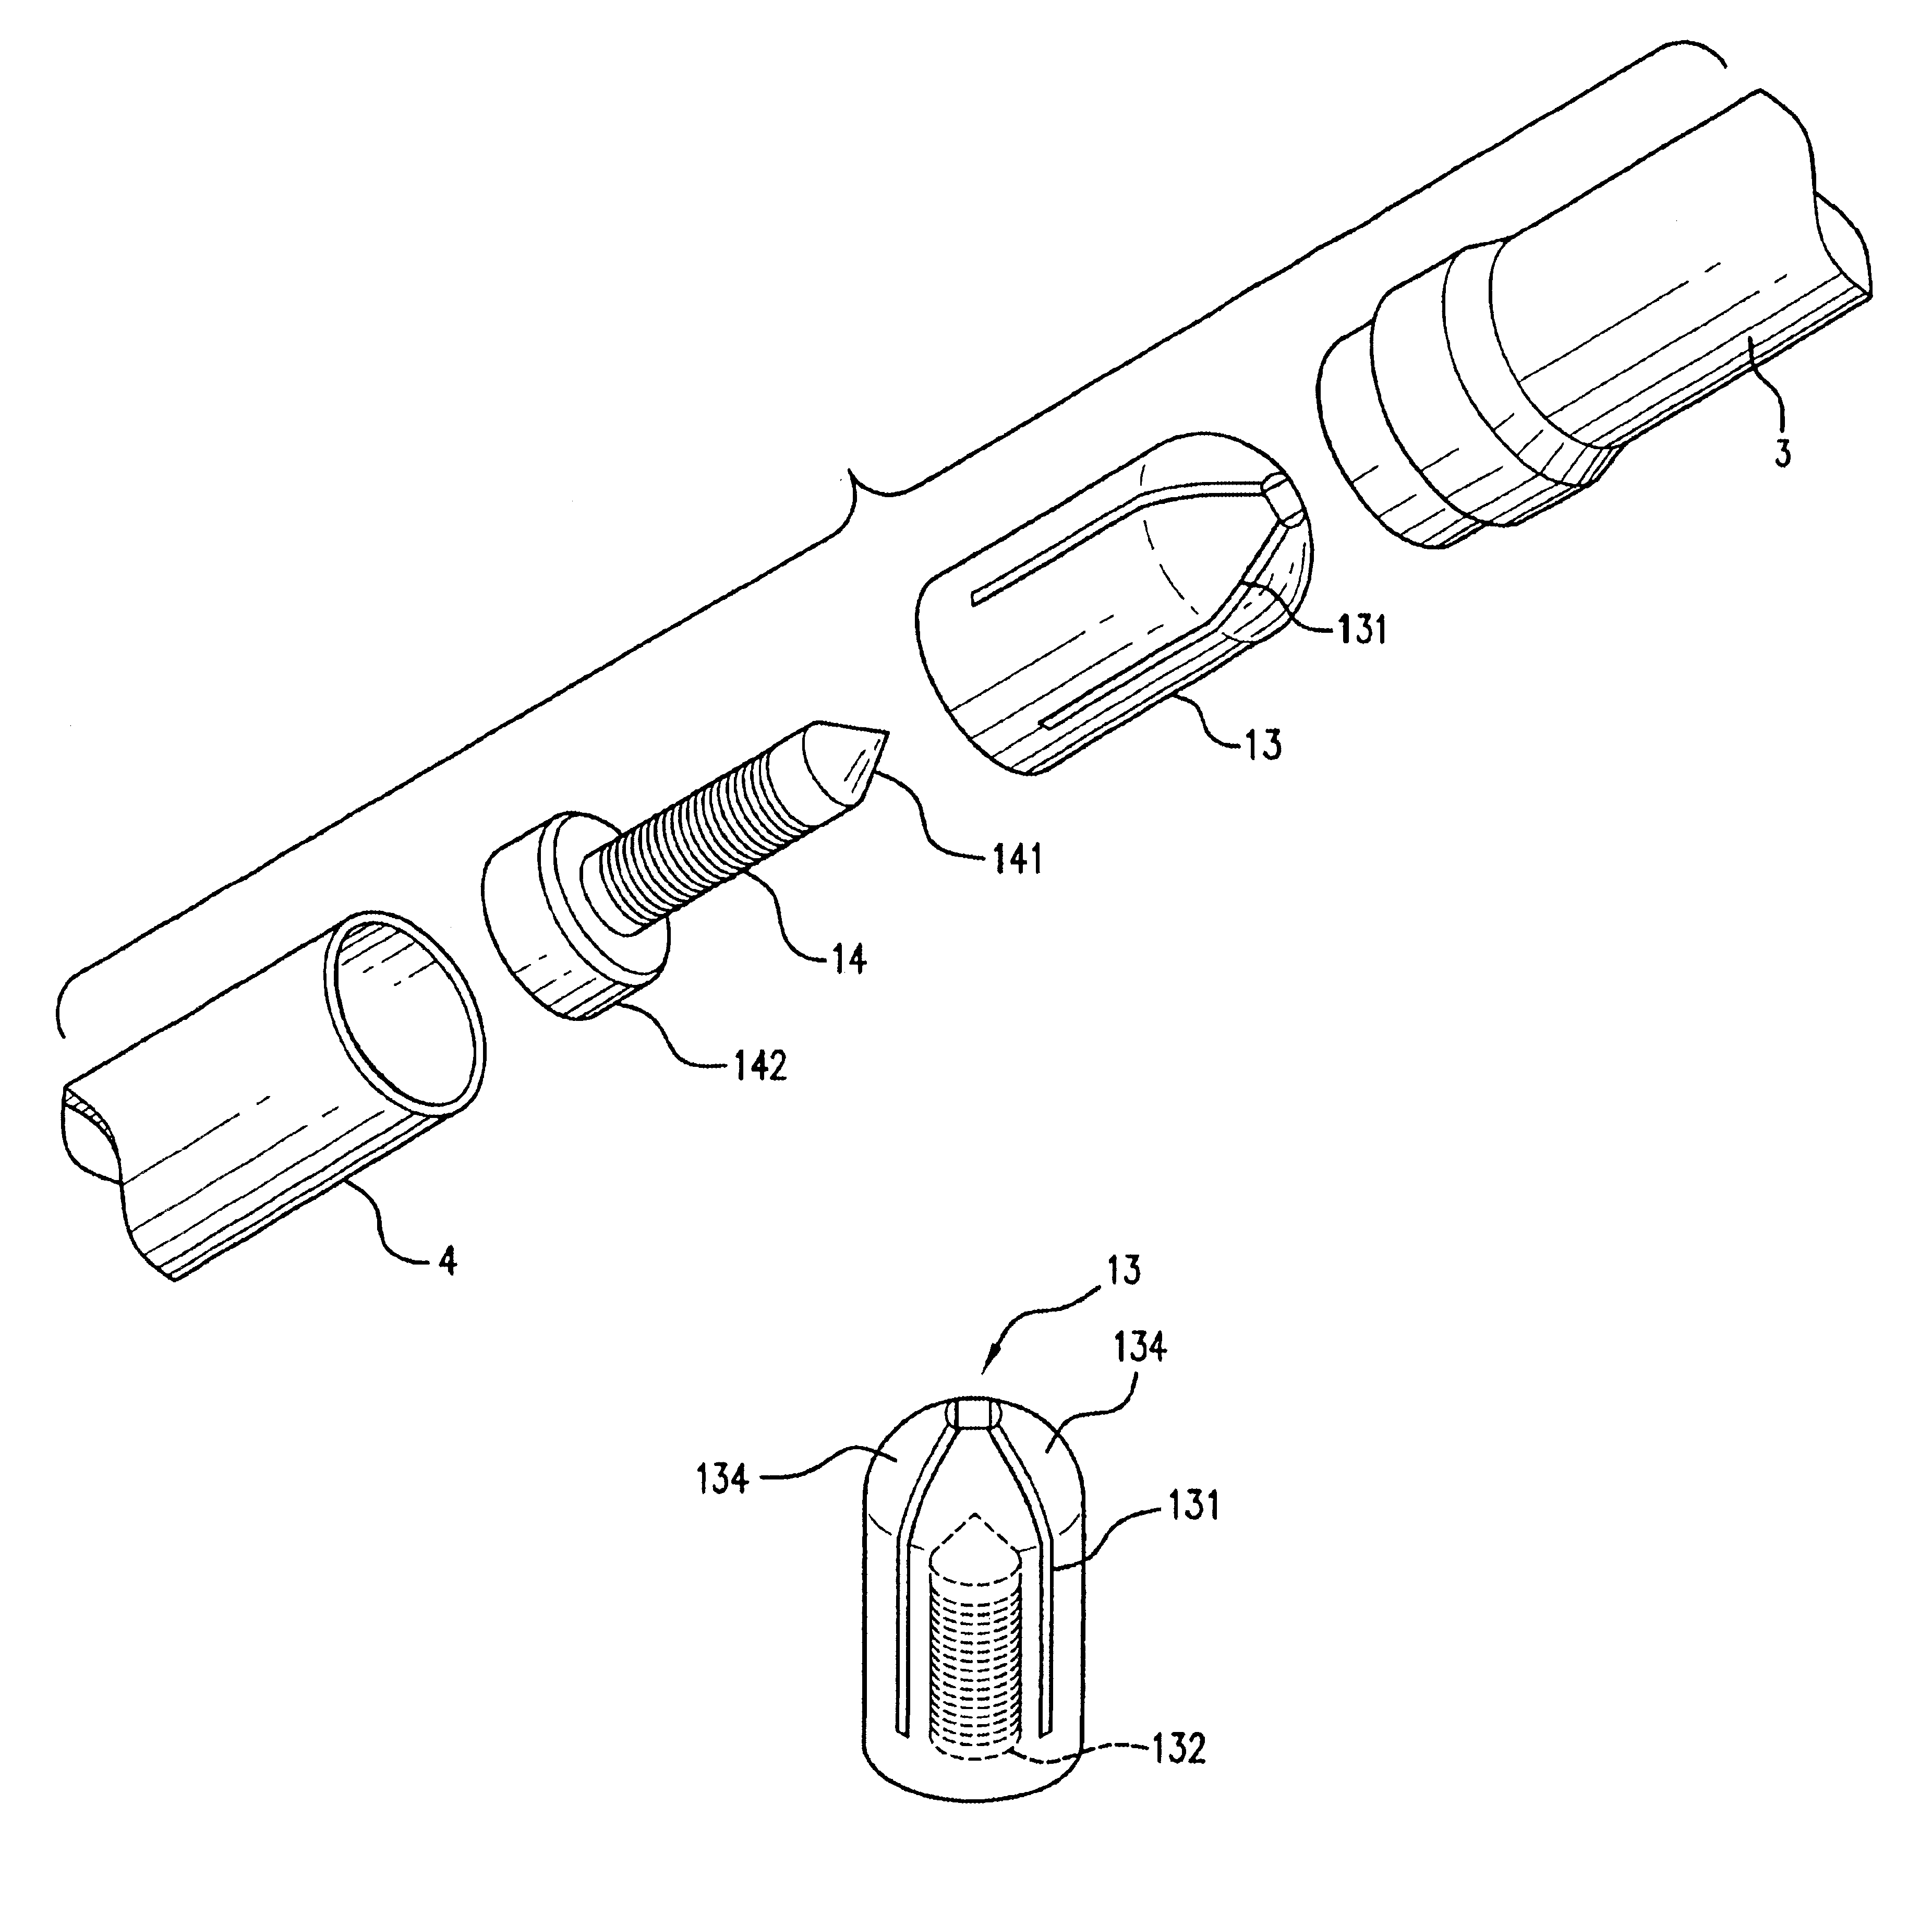 Stagelessly adjustable telescopic walking stick with a position retaining device